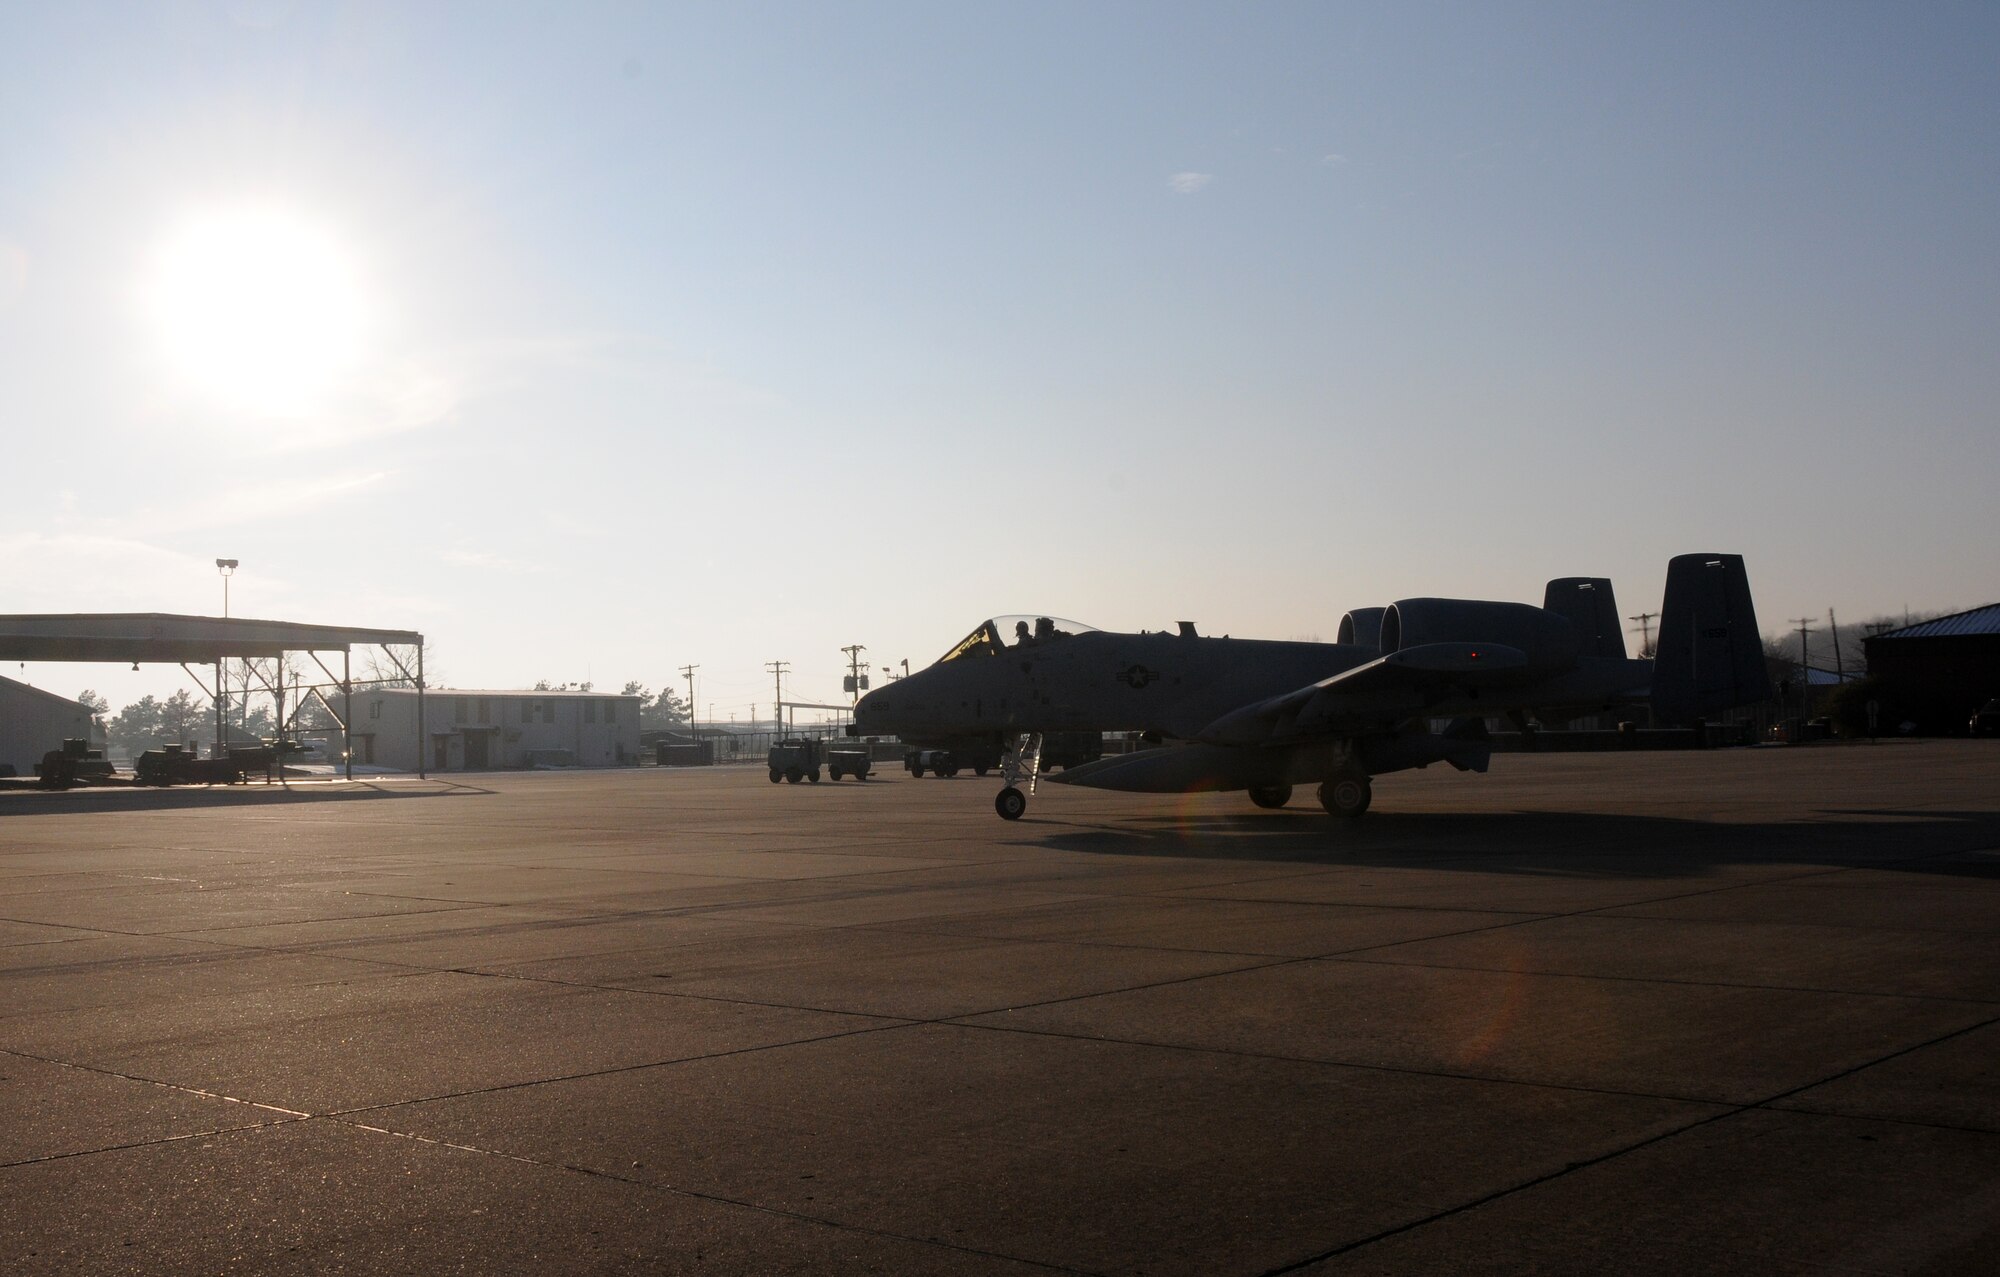 Col. Michael Stohler, a pilot with the Indiana Air National Guard's 122nd Fighter Wing, taxis on the ramp at Ebbing Air National Guard Base, Fort Smith, Ark., Dec. 11, 2013, preparing to deliver an A-10C Thunderbolt II "Warthog" from the 188th Fighter Wing to the 122nd. Tail Nos. 659 and 626 are bound for Fort Wayne, Ind., as part of the 188th’s on-going conversion from a fighter mission to remotely piloted aircraft and Intelligence mission, which will include a space-focused targeting squadron. (U.S. Air National Guard photo by Senior Airman John Hillier/188th Fighter Wing Public Affairs)